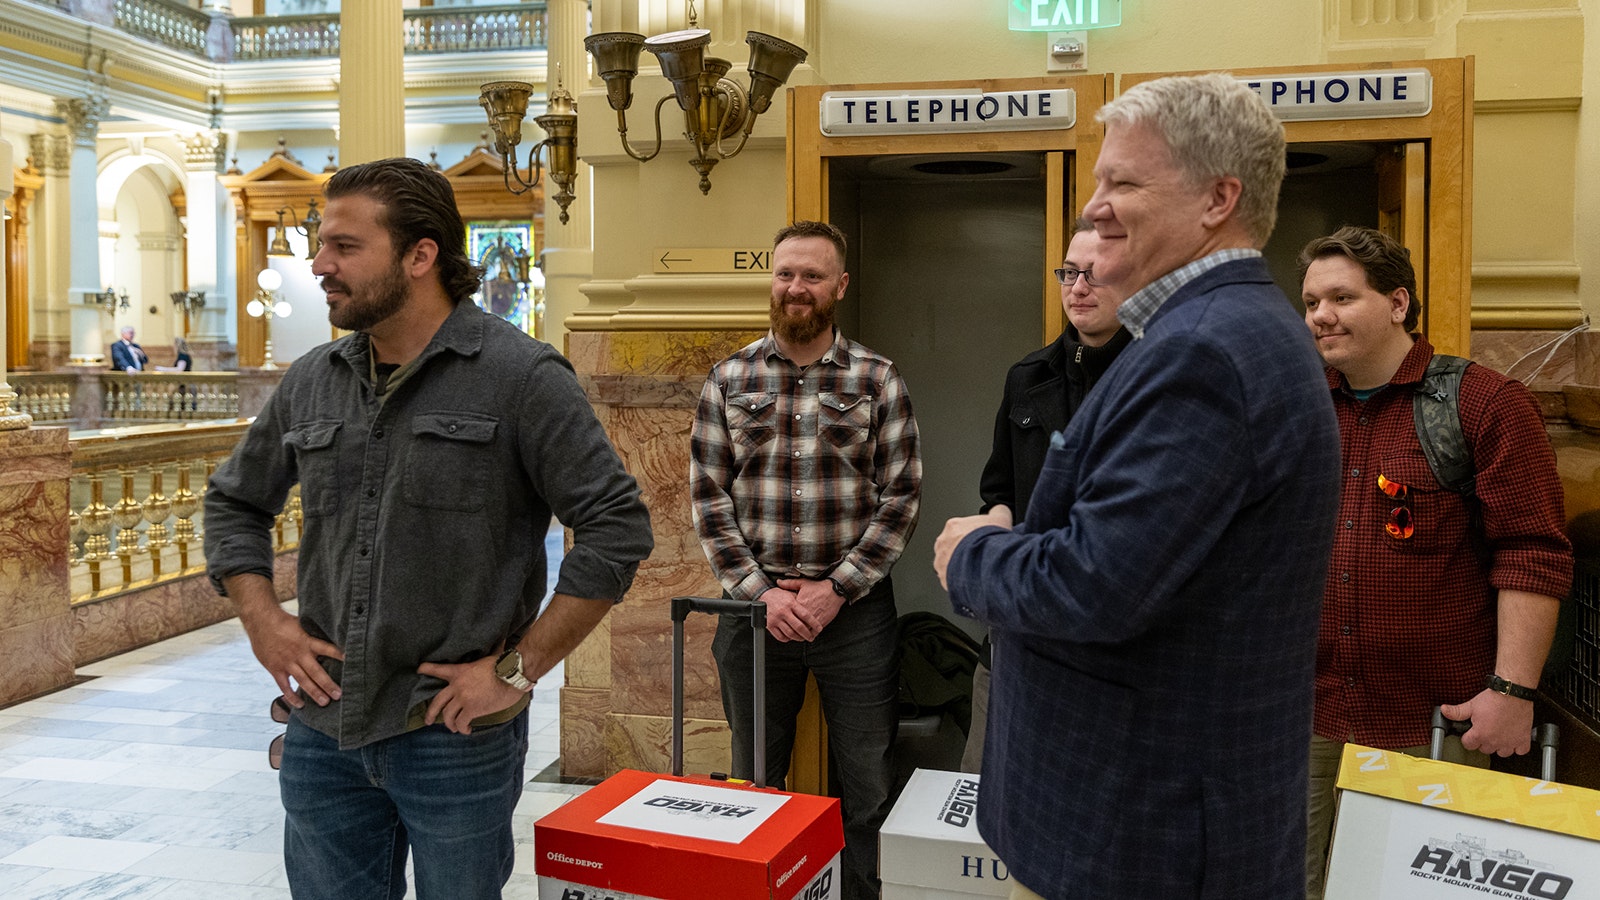 Gun rights advocates prepare to deliver thousands of petitions protesting an “assault weapons ban” bill in the Colorado state Capitol early Tuesday.